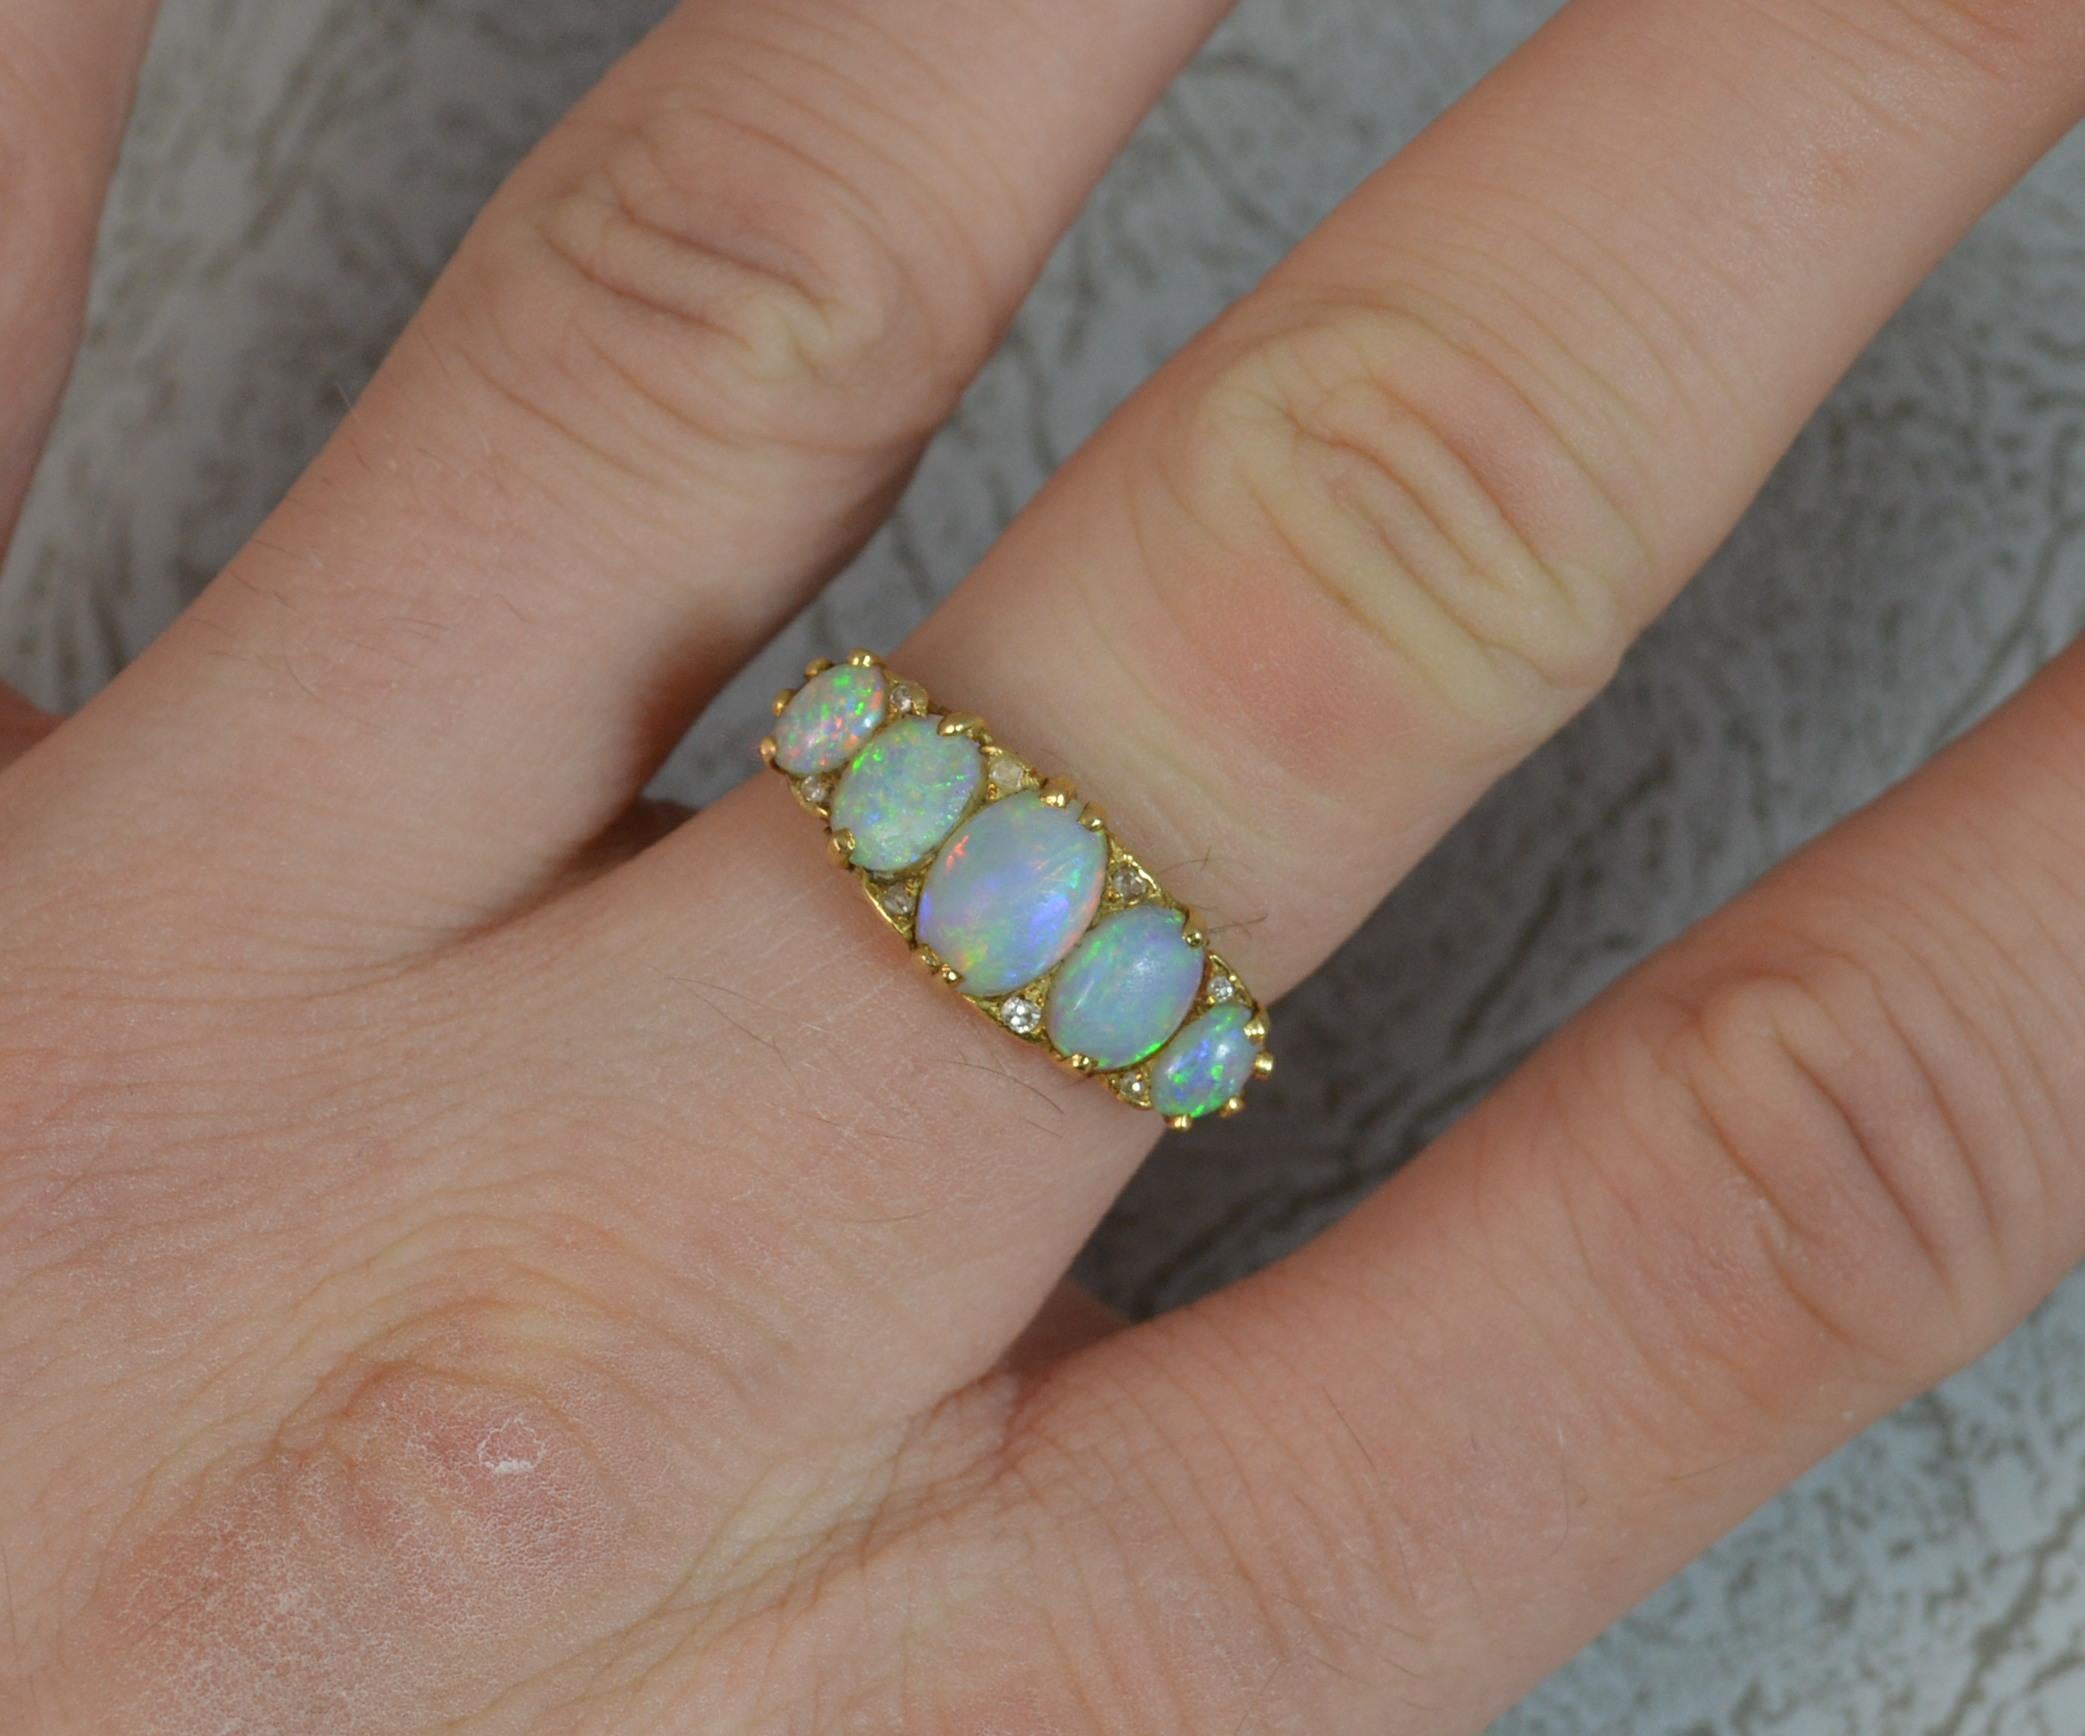 A beautiful true Victorian period cluster stack ring c1880.
SIZE ; N 1/2 UK, 7 US
Solid 18 carat yellow gold example with small diamond accents in between.
Five natural oval shaped opals of slightly graduated size with pierced floral setting above